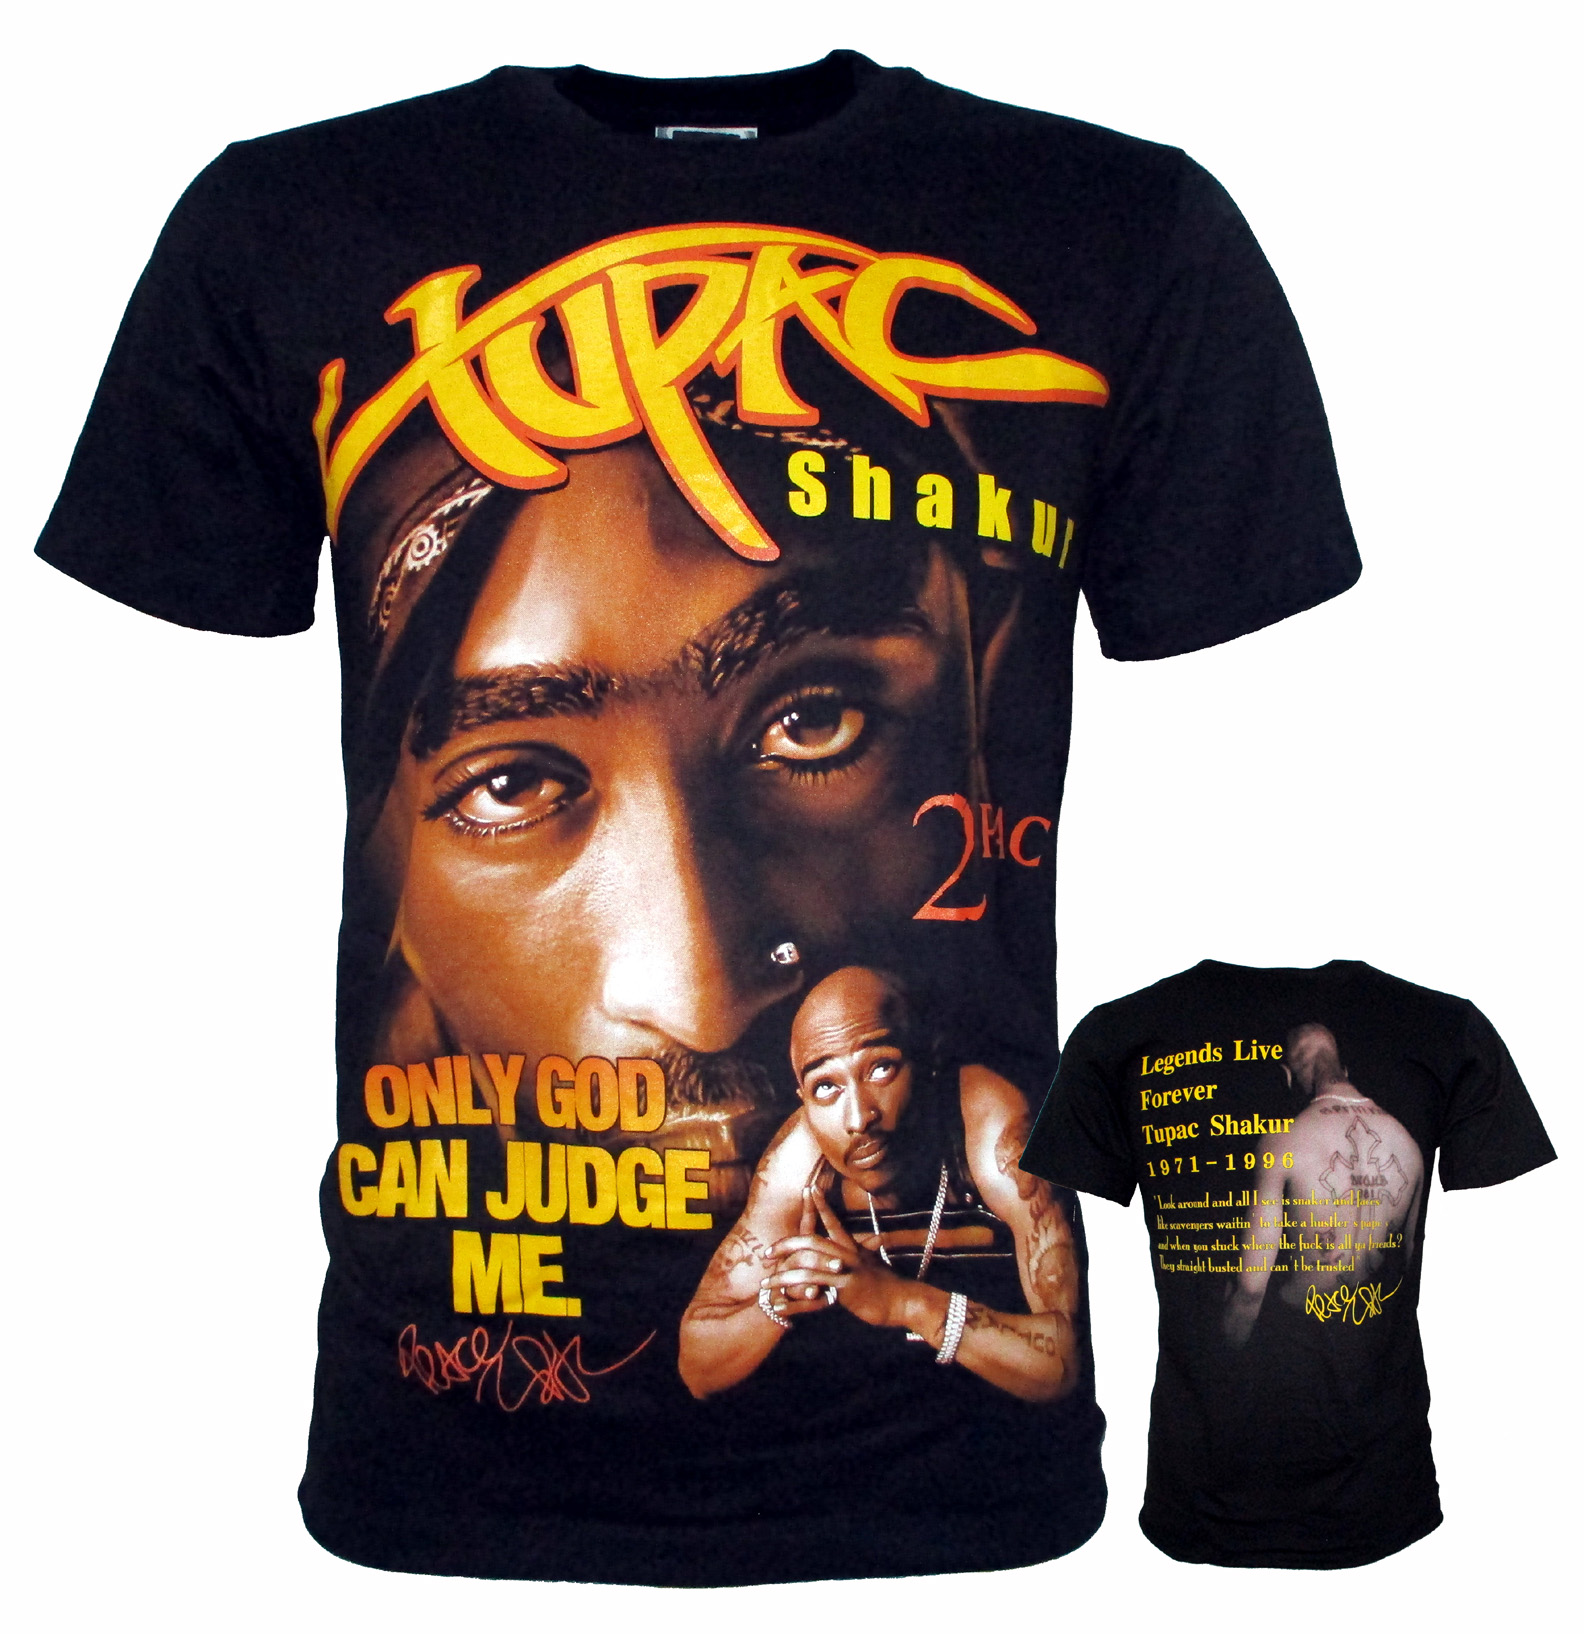 2pac only god can judge me